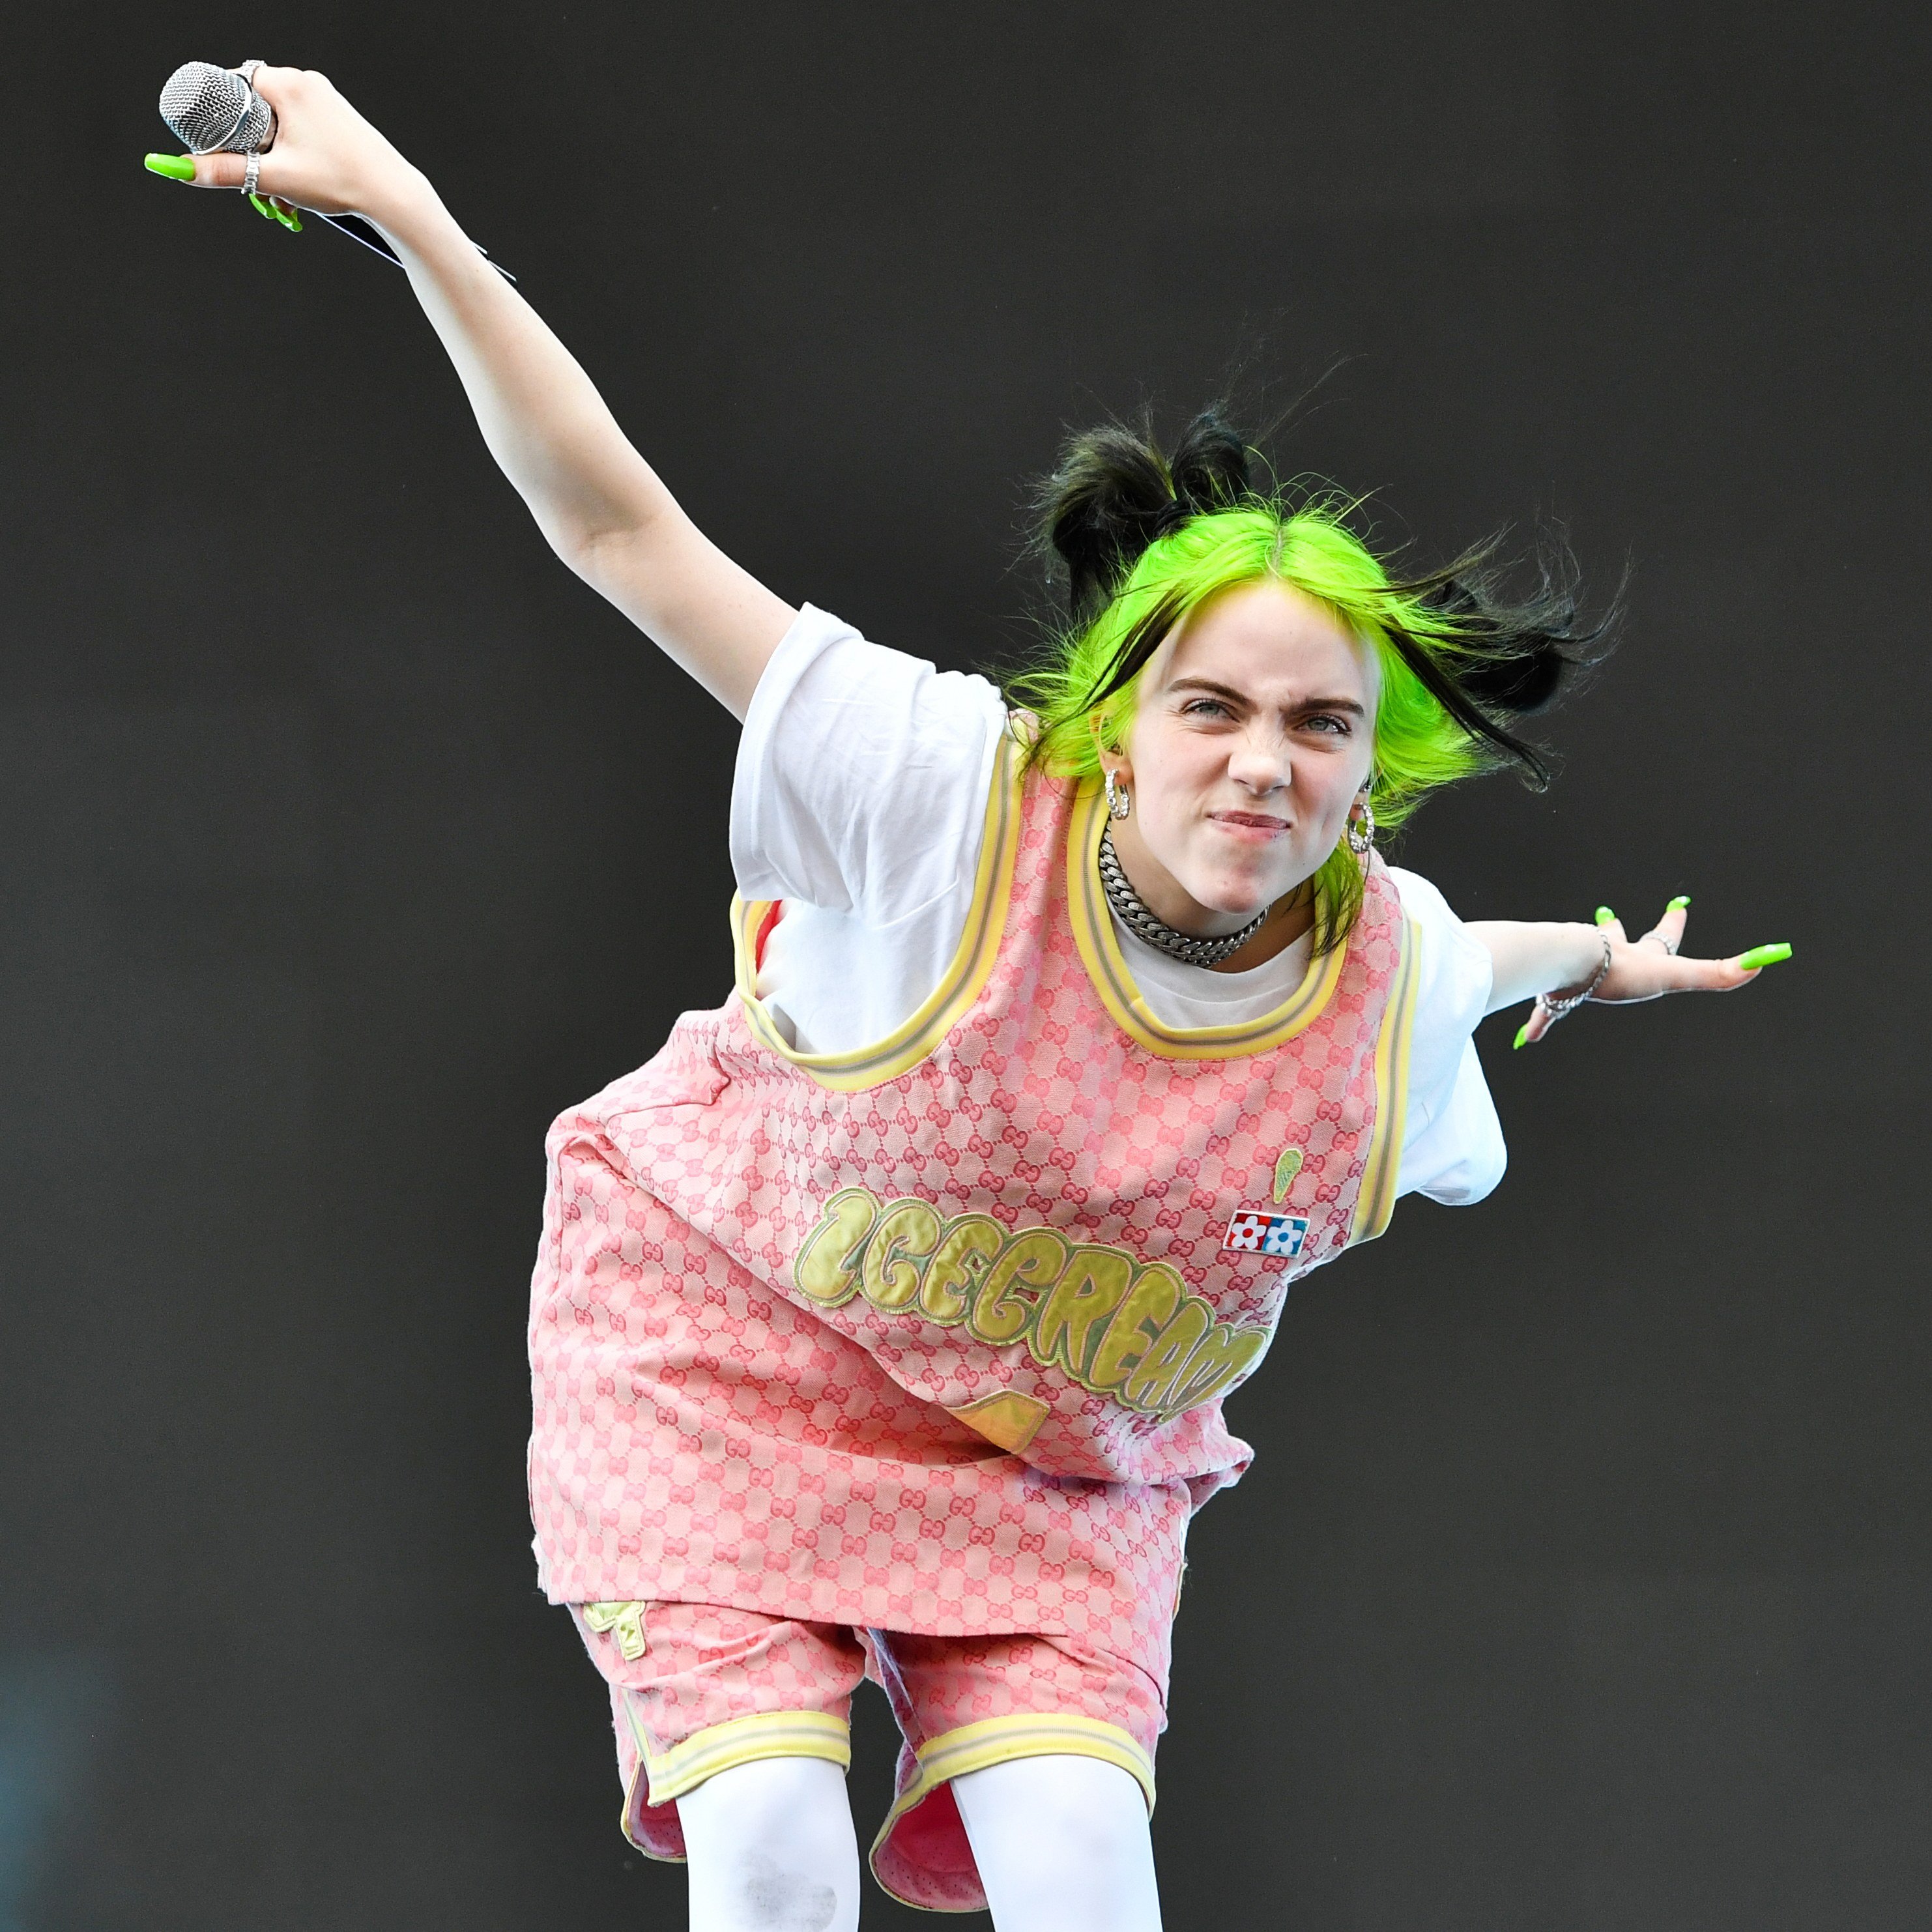 Billie Eilish Told a Fan Who Stole Her Ring at ACL Festival